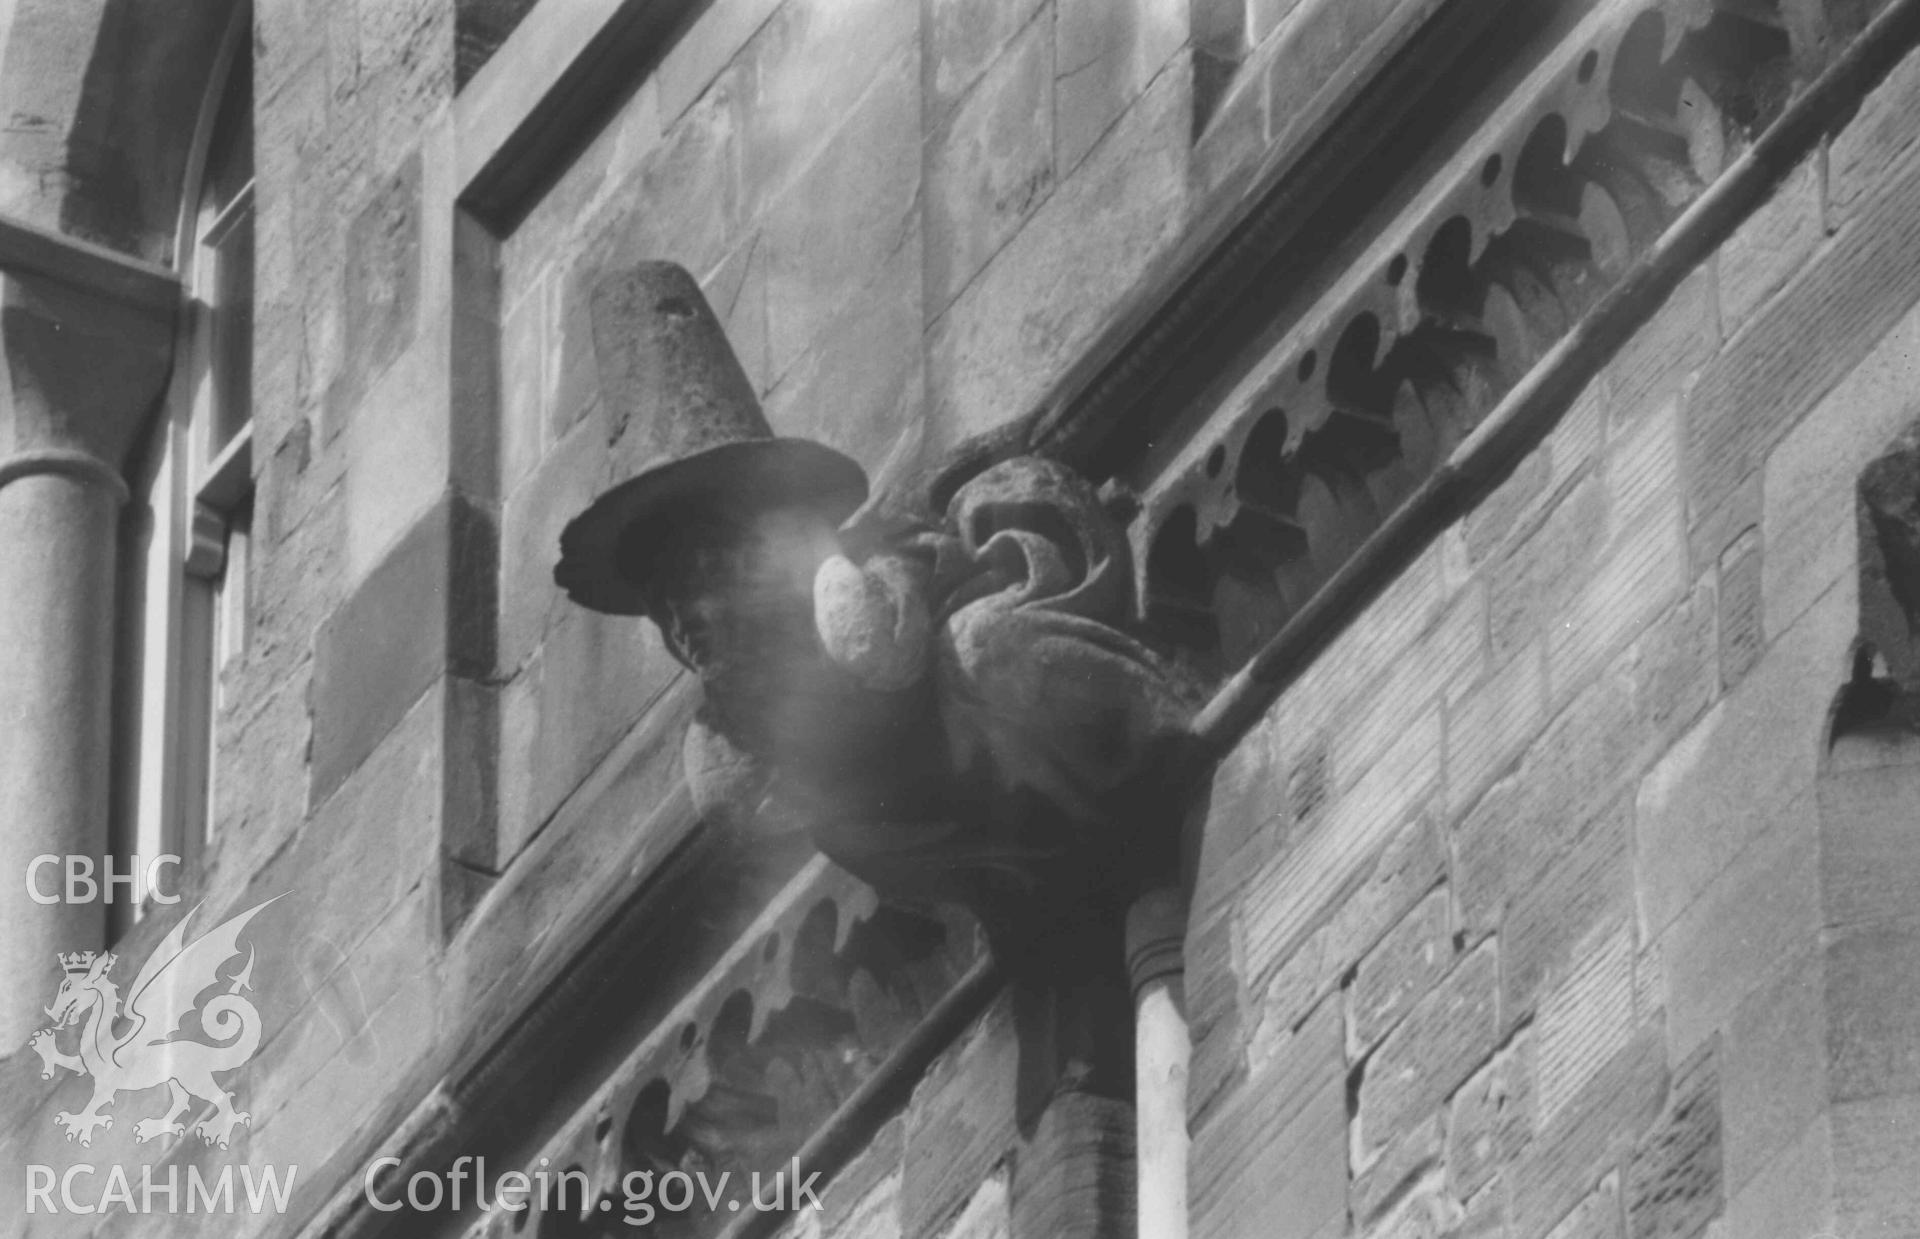 Digital copy of a black and white negative showing gargoyles on the south east side of the UCW building overlooking King Street, Aberystwyth (Telephoto). Photographed by Arthur Chater on 2 April 1969. Grid Reference SN 581 817.